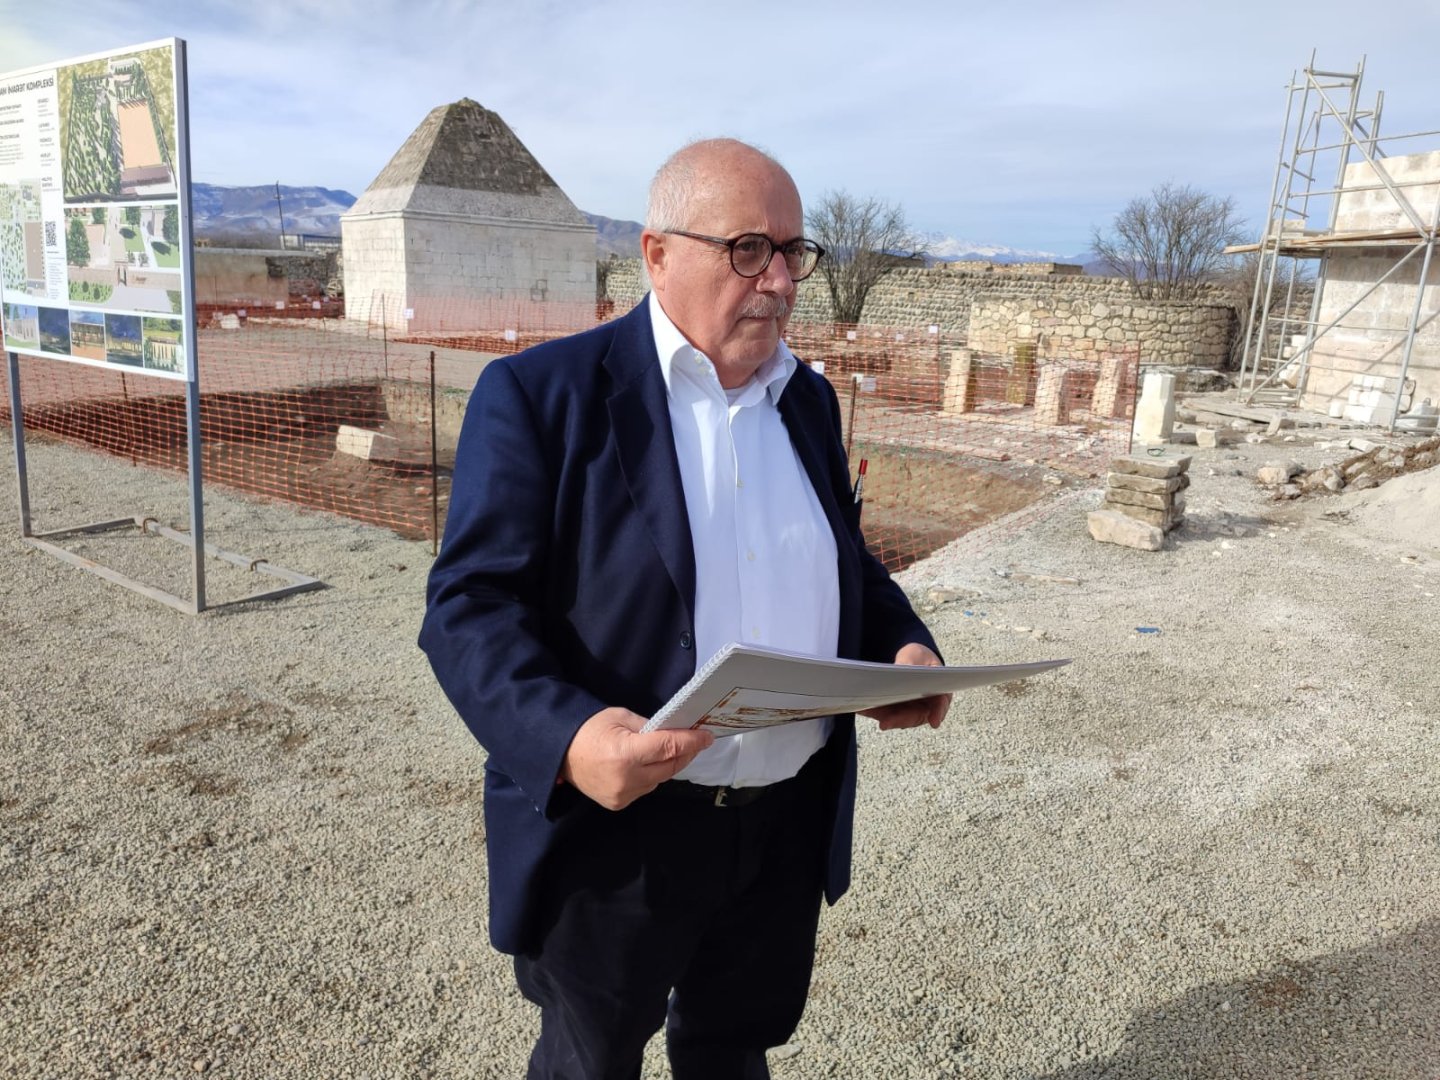 Historical spot in Azerbaijan's Aghdam heavily suffered during occupation - Italian expert